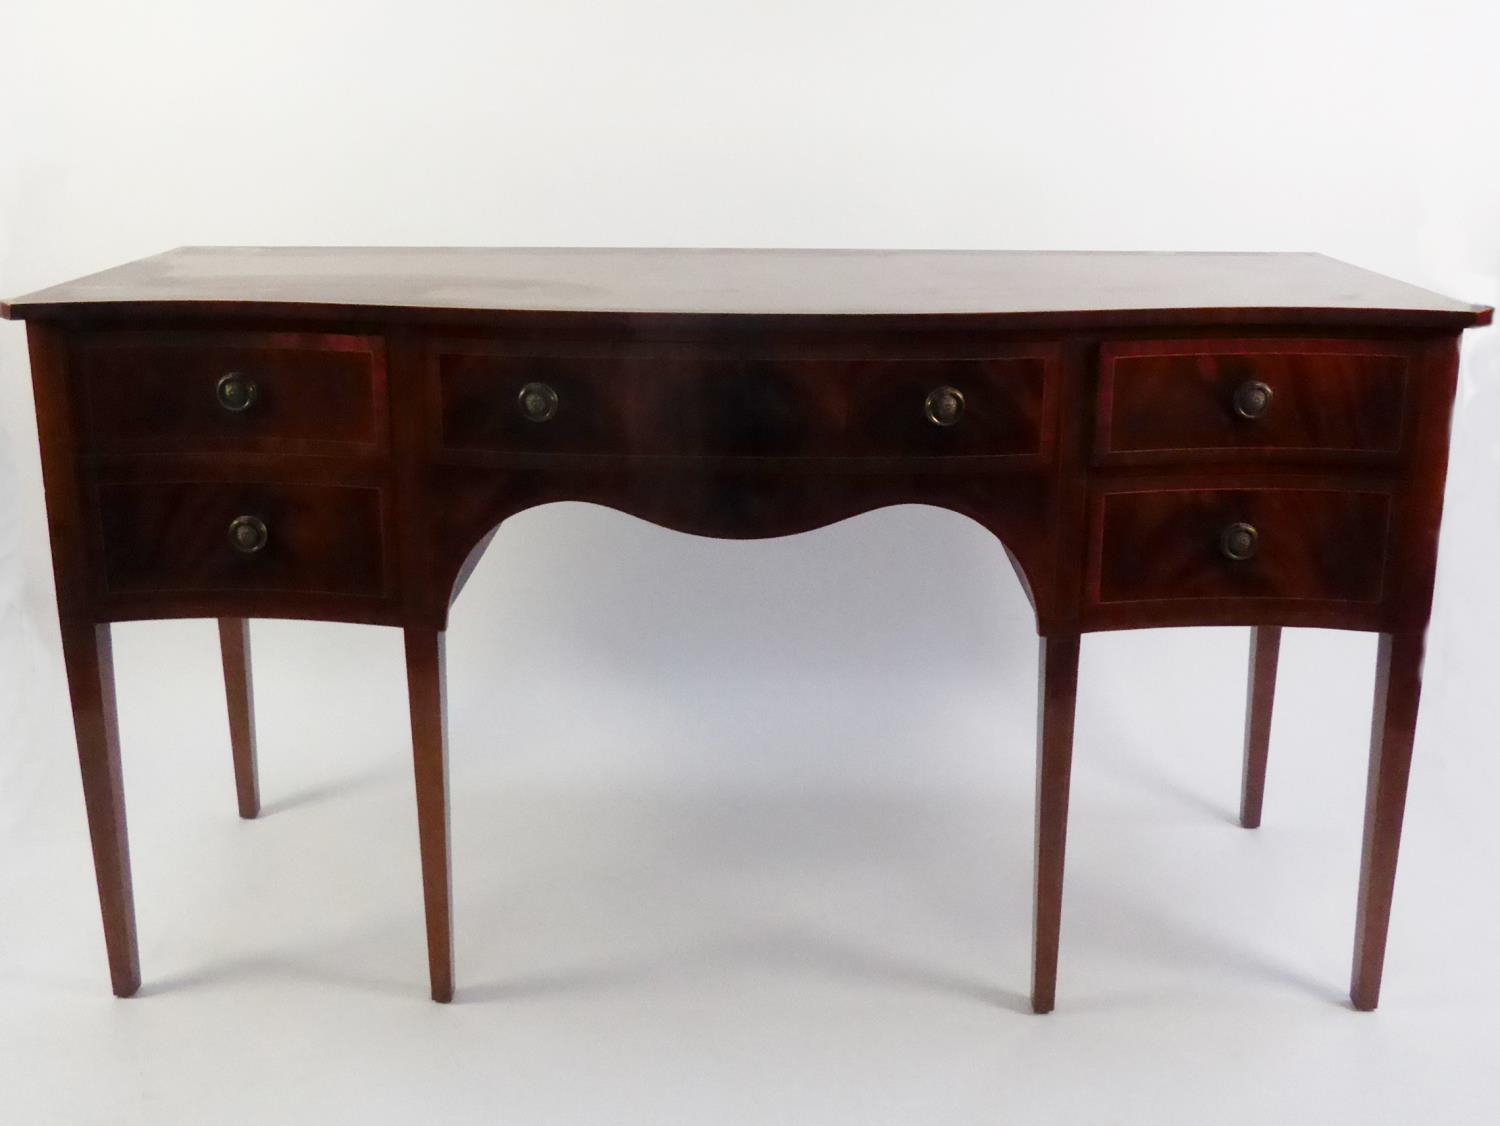 HEPPLEWHITE STYLE INLAID AND CROSSBANDED MAHOGANY DINING ROOM FURNITURE, 10 pieces, viz ten - Image 3 of 4